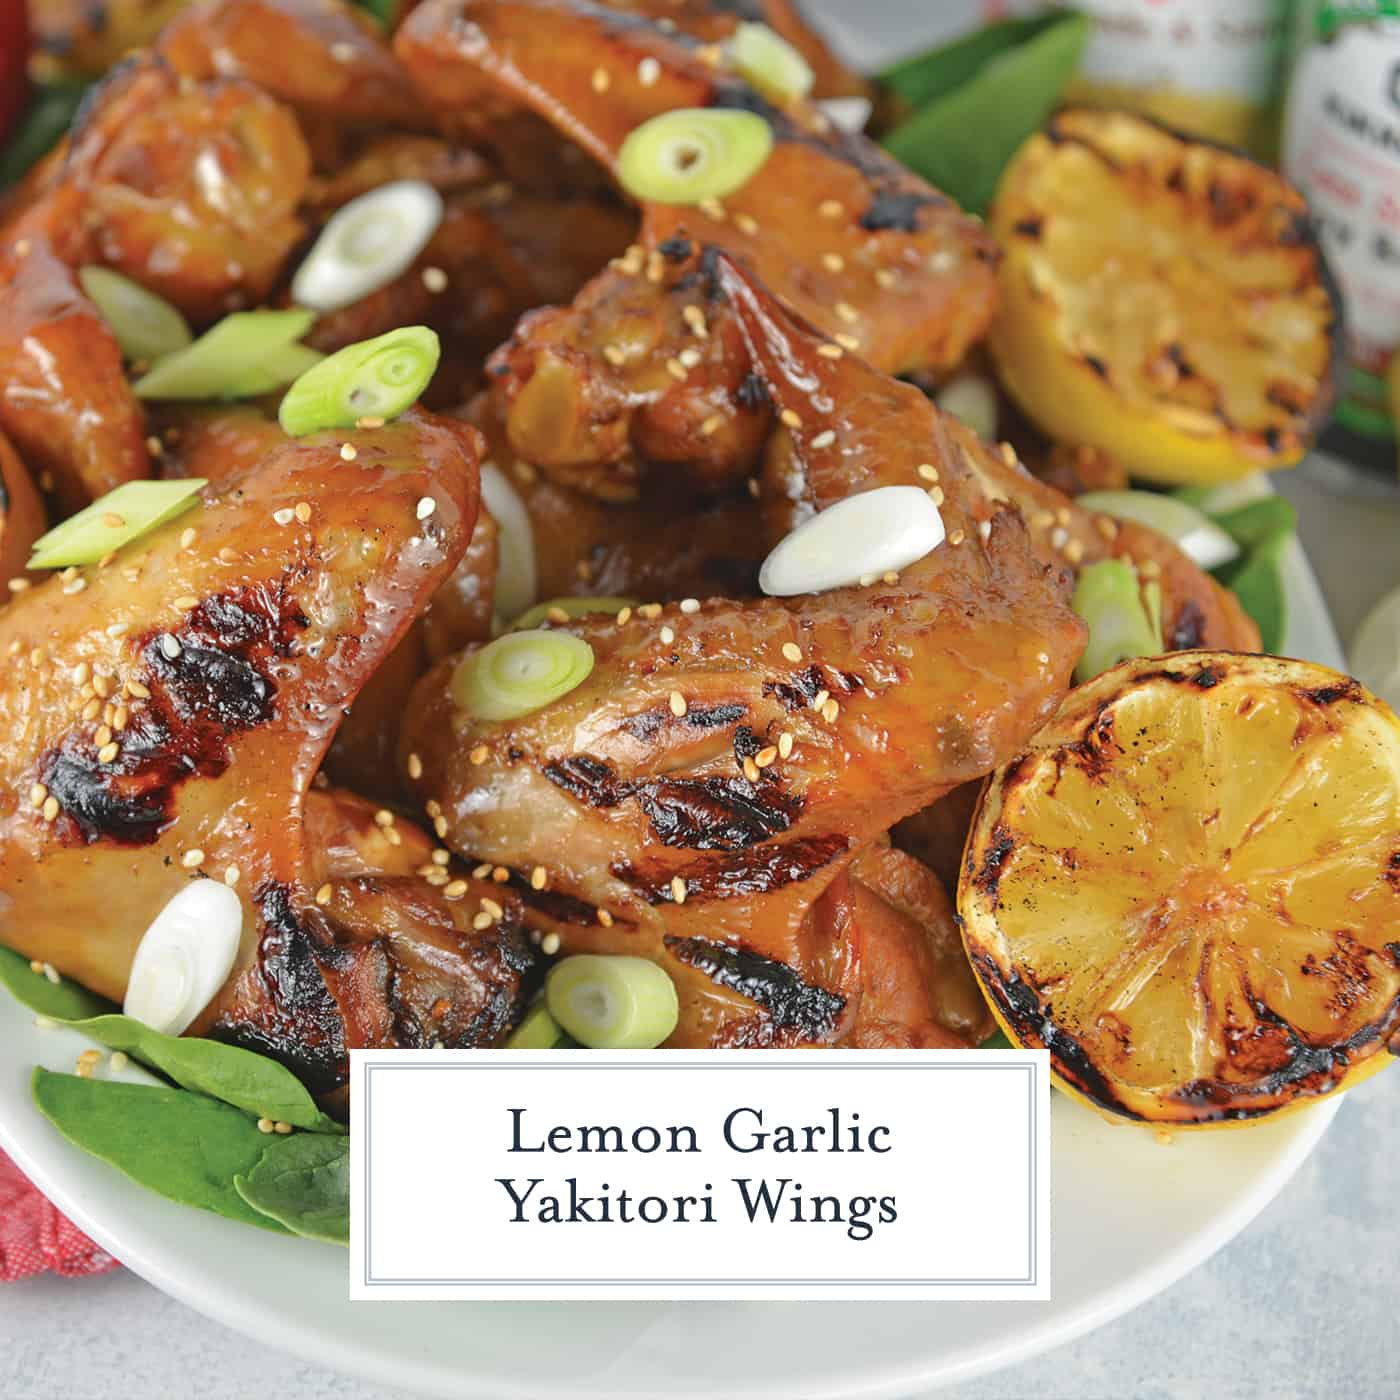 Lemon Garlic Yakitori Wings are marinated in a zesty lemon garlic marinade and grilled to perfection. Serve your grilled wings with classic BBQ side dishes. #grilledwings #chickenmarinades www.savoryexperiments.com 